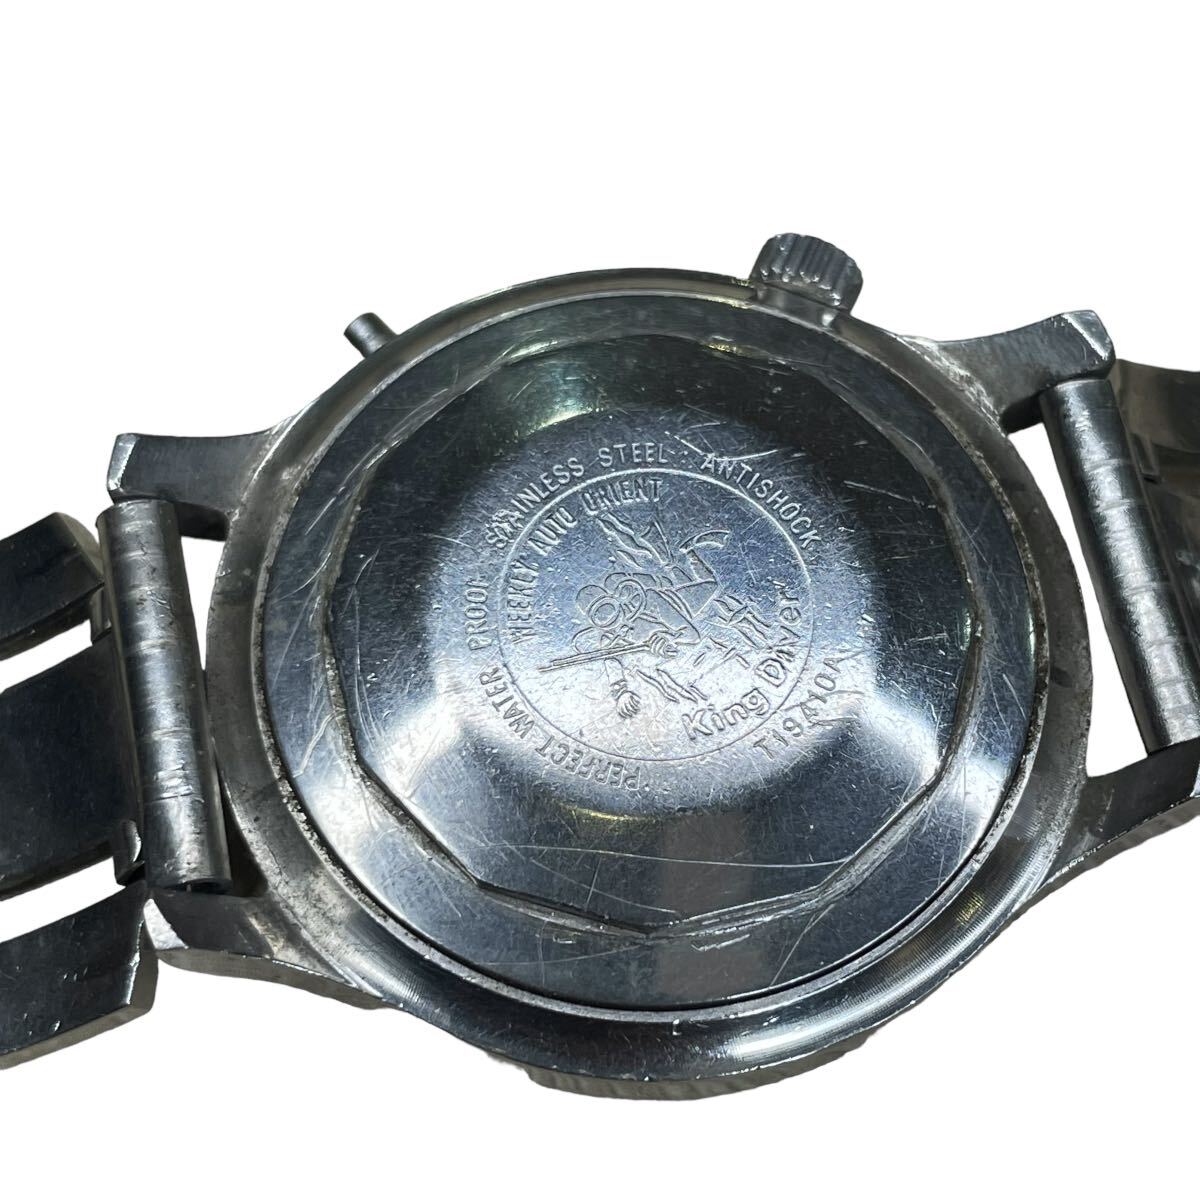 [ Junk ]WEEKLY AUTO ORIENT KING DIVER Orient AT/ self-winding watch King diver T19410 A Date black face men's wristwatch 